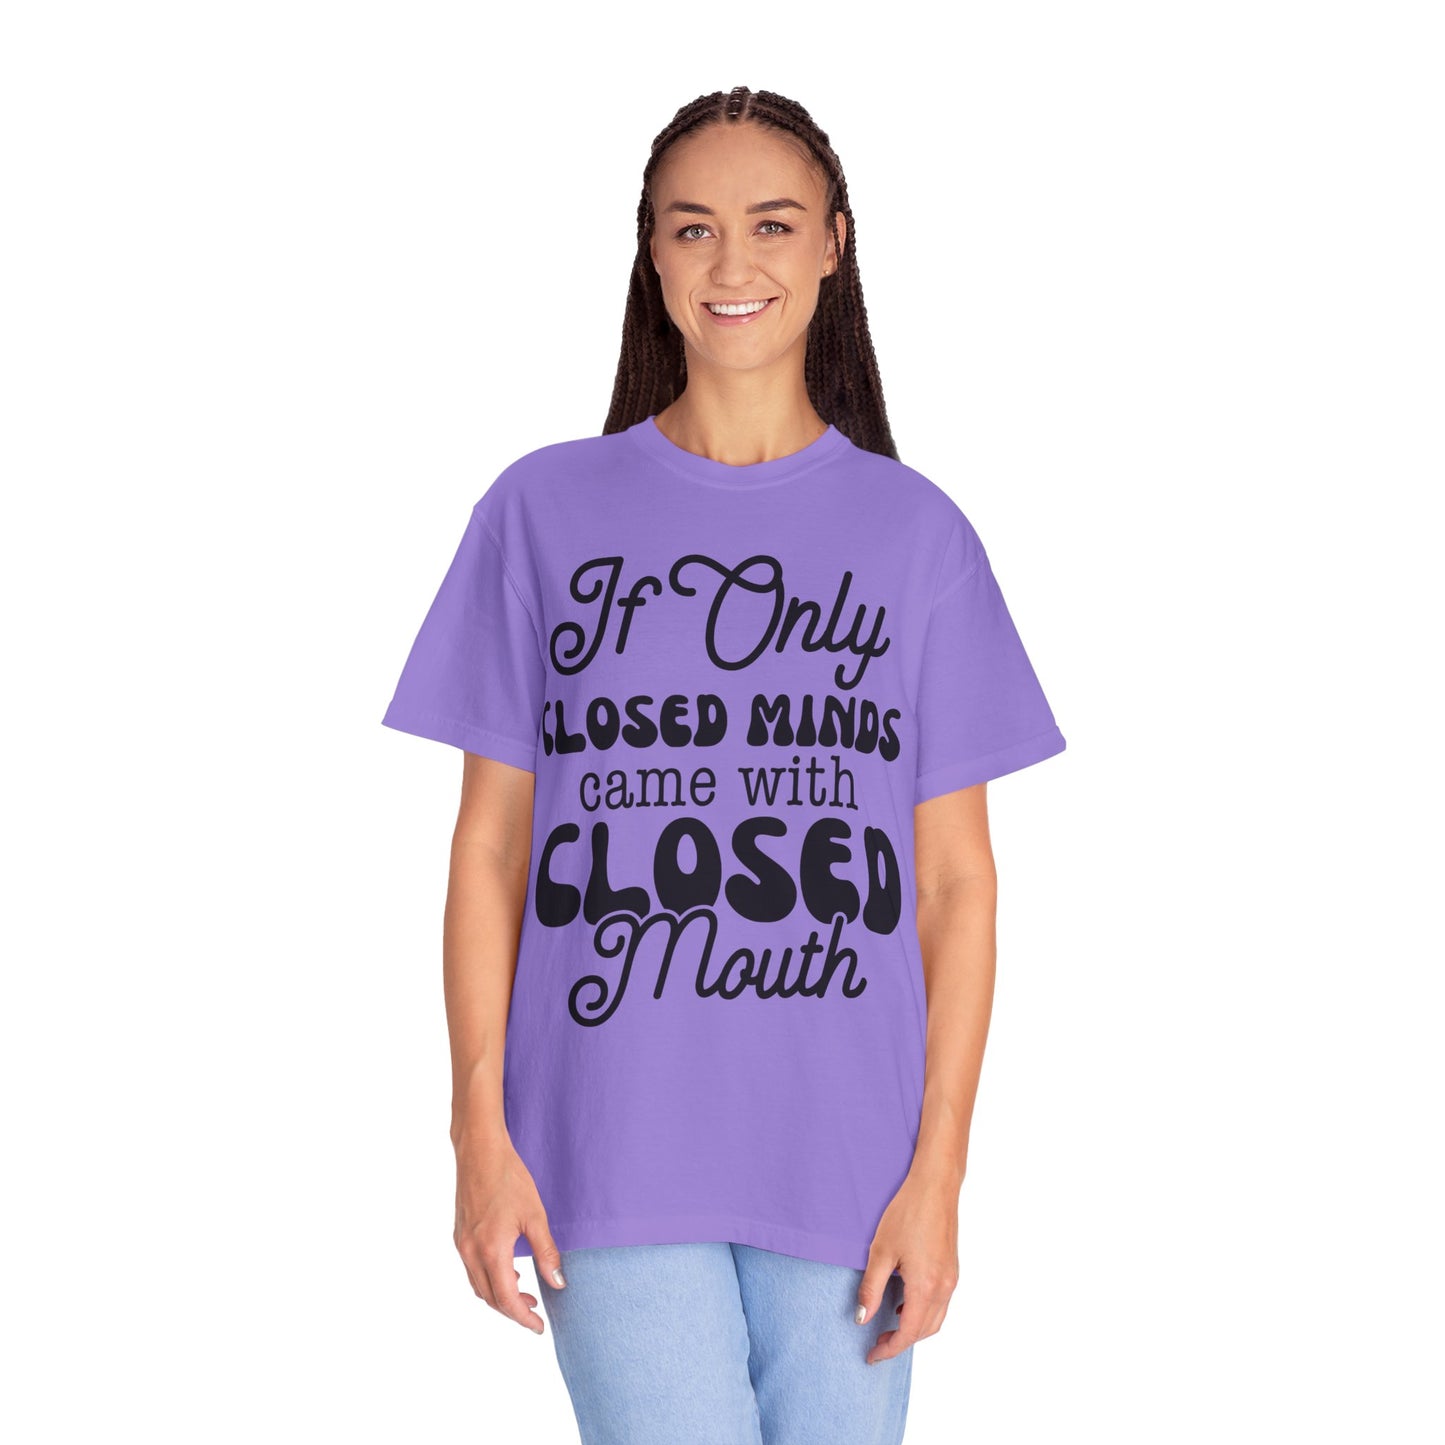 If close minds came with closed mouth - Unisex Garment-Dyed T-shirt